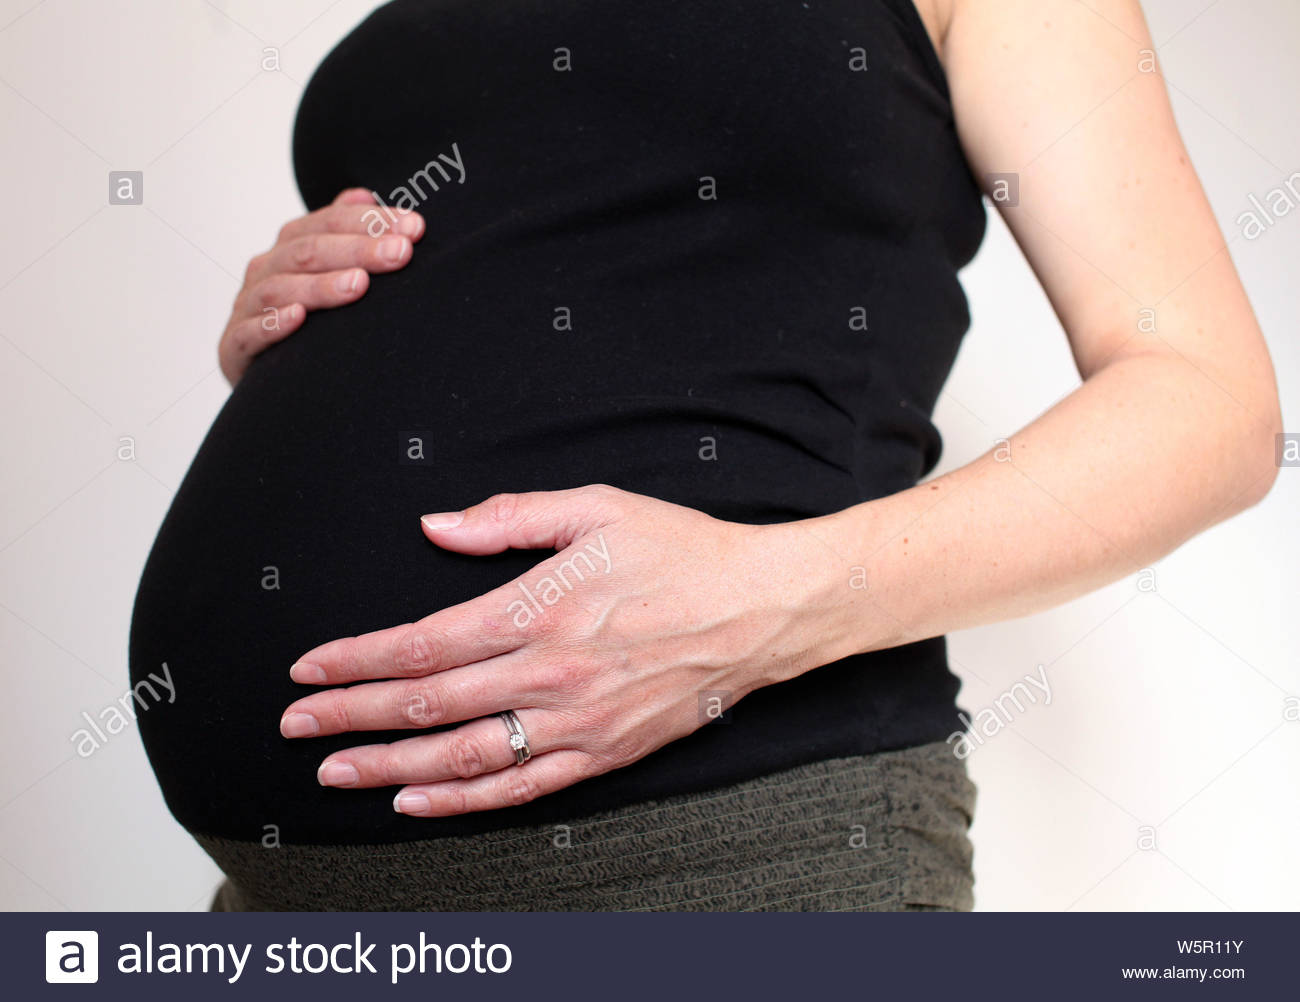 File Photo Dated 05 09 10 Of A Pregnant Woman High Blood Sugar